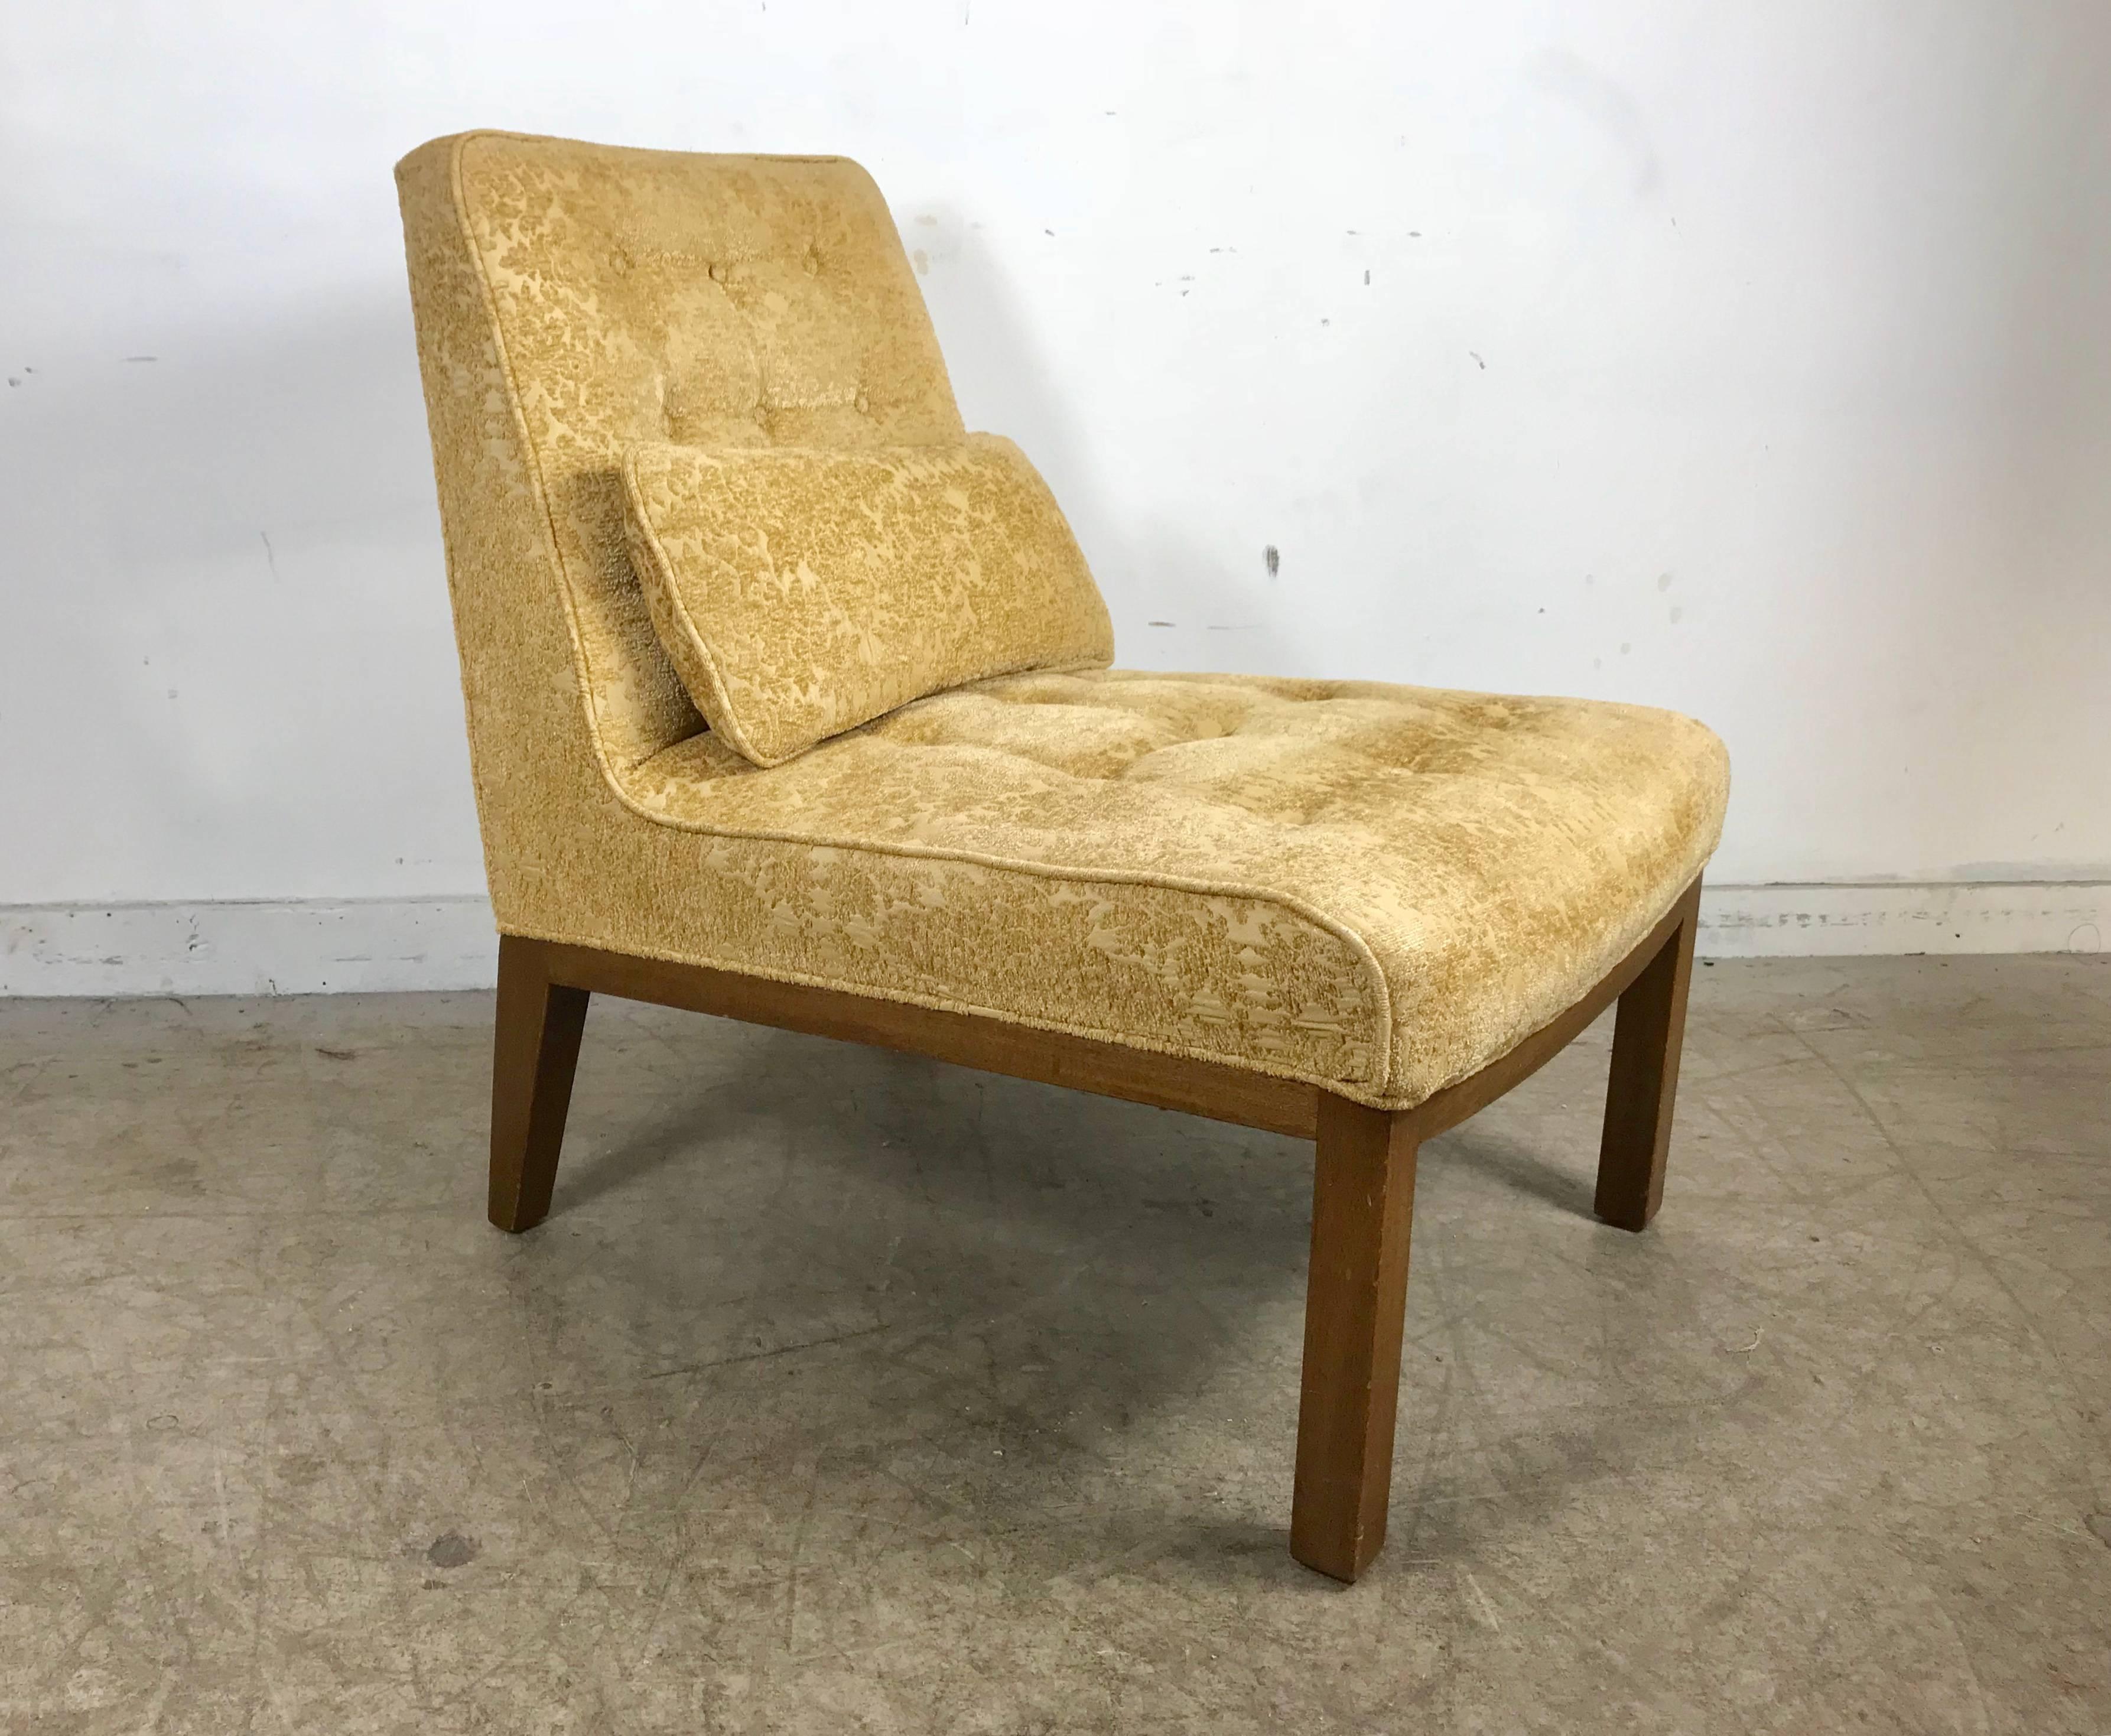 Classic modern slipper chair designed by Edward Wormley for Dunbar. Retains original fabric in nice usable condition, also retains original 